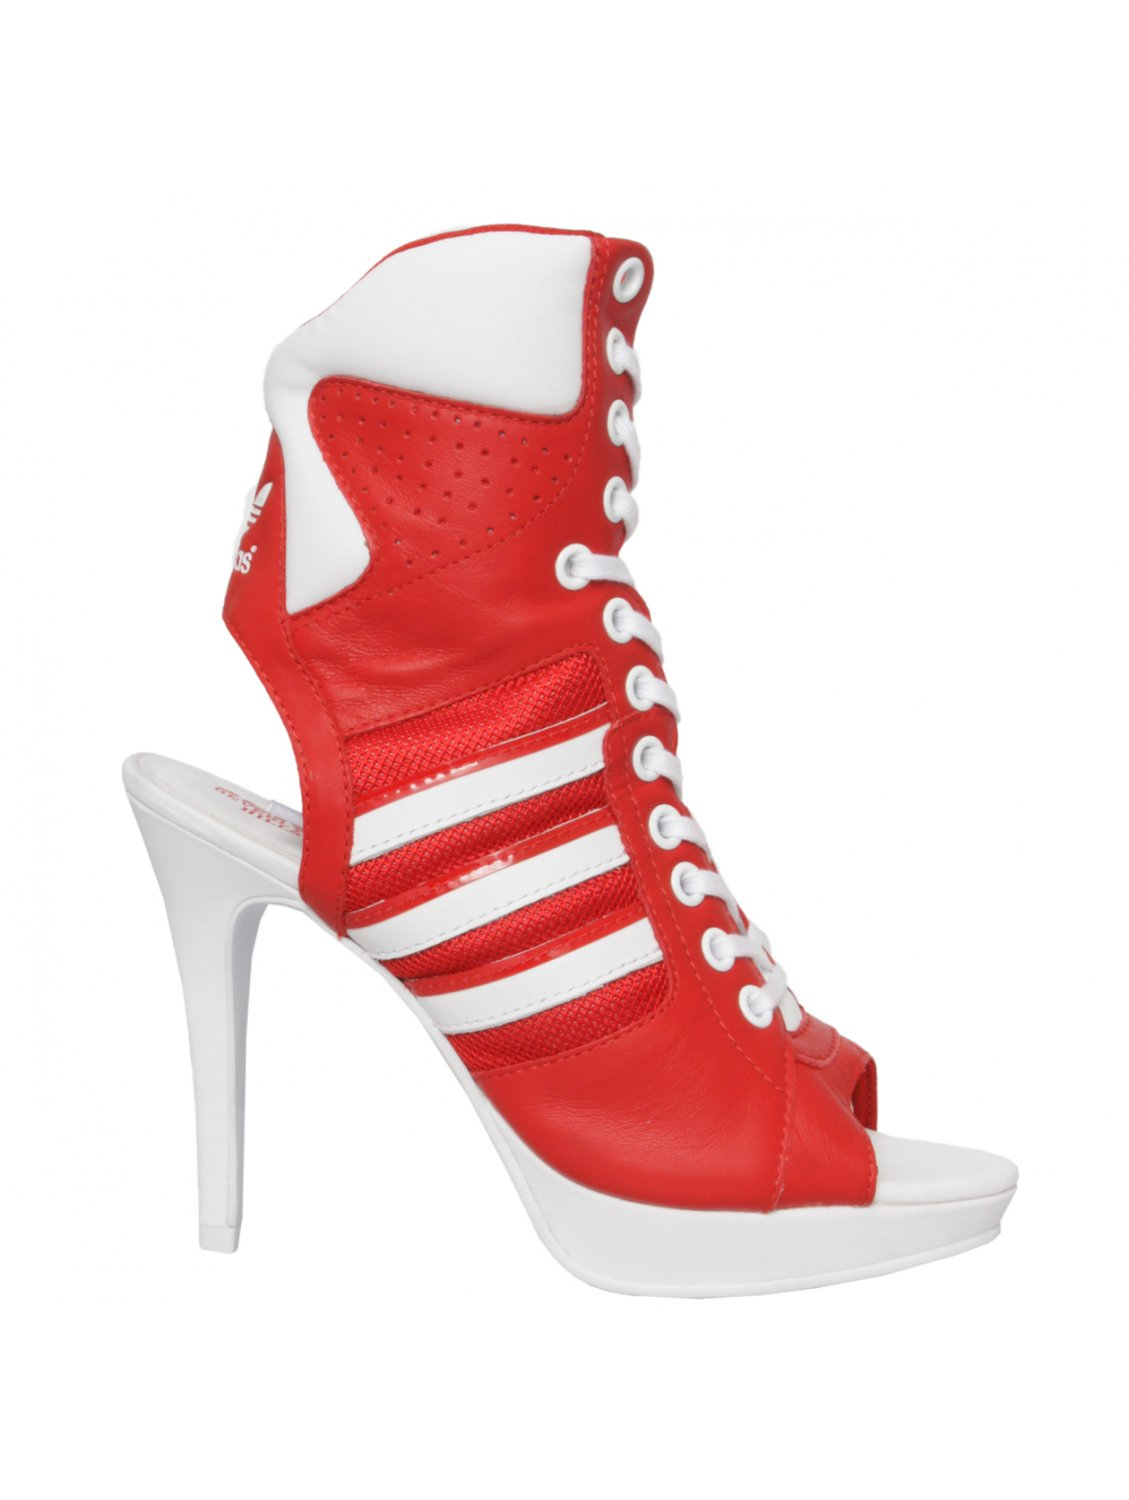 Squire coverage forgetful Jeremy Scott for adidas Lace Up High Heels Red | Lyst UK